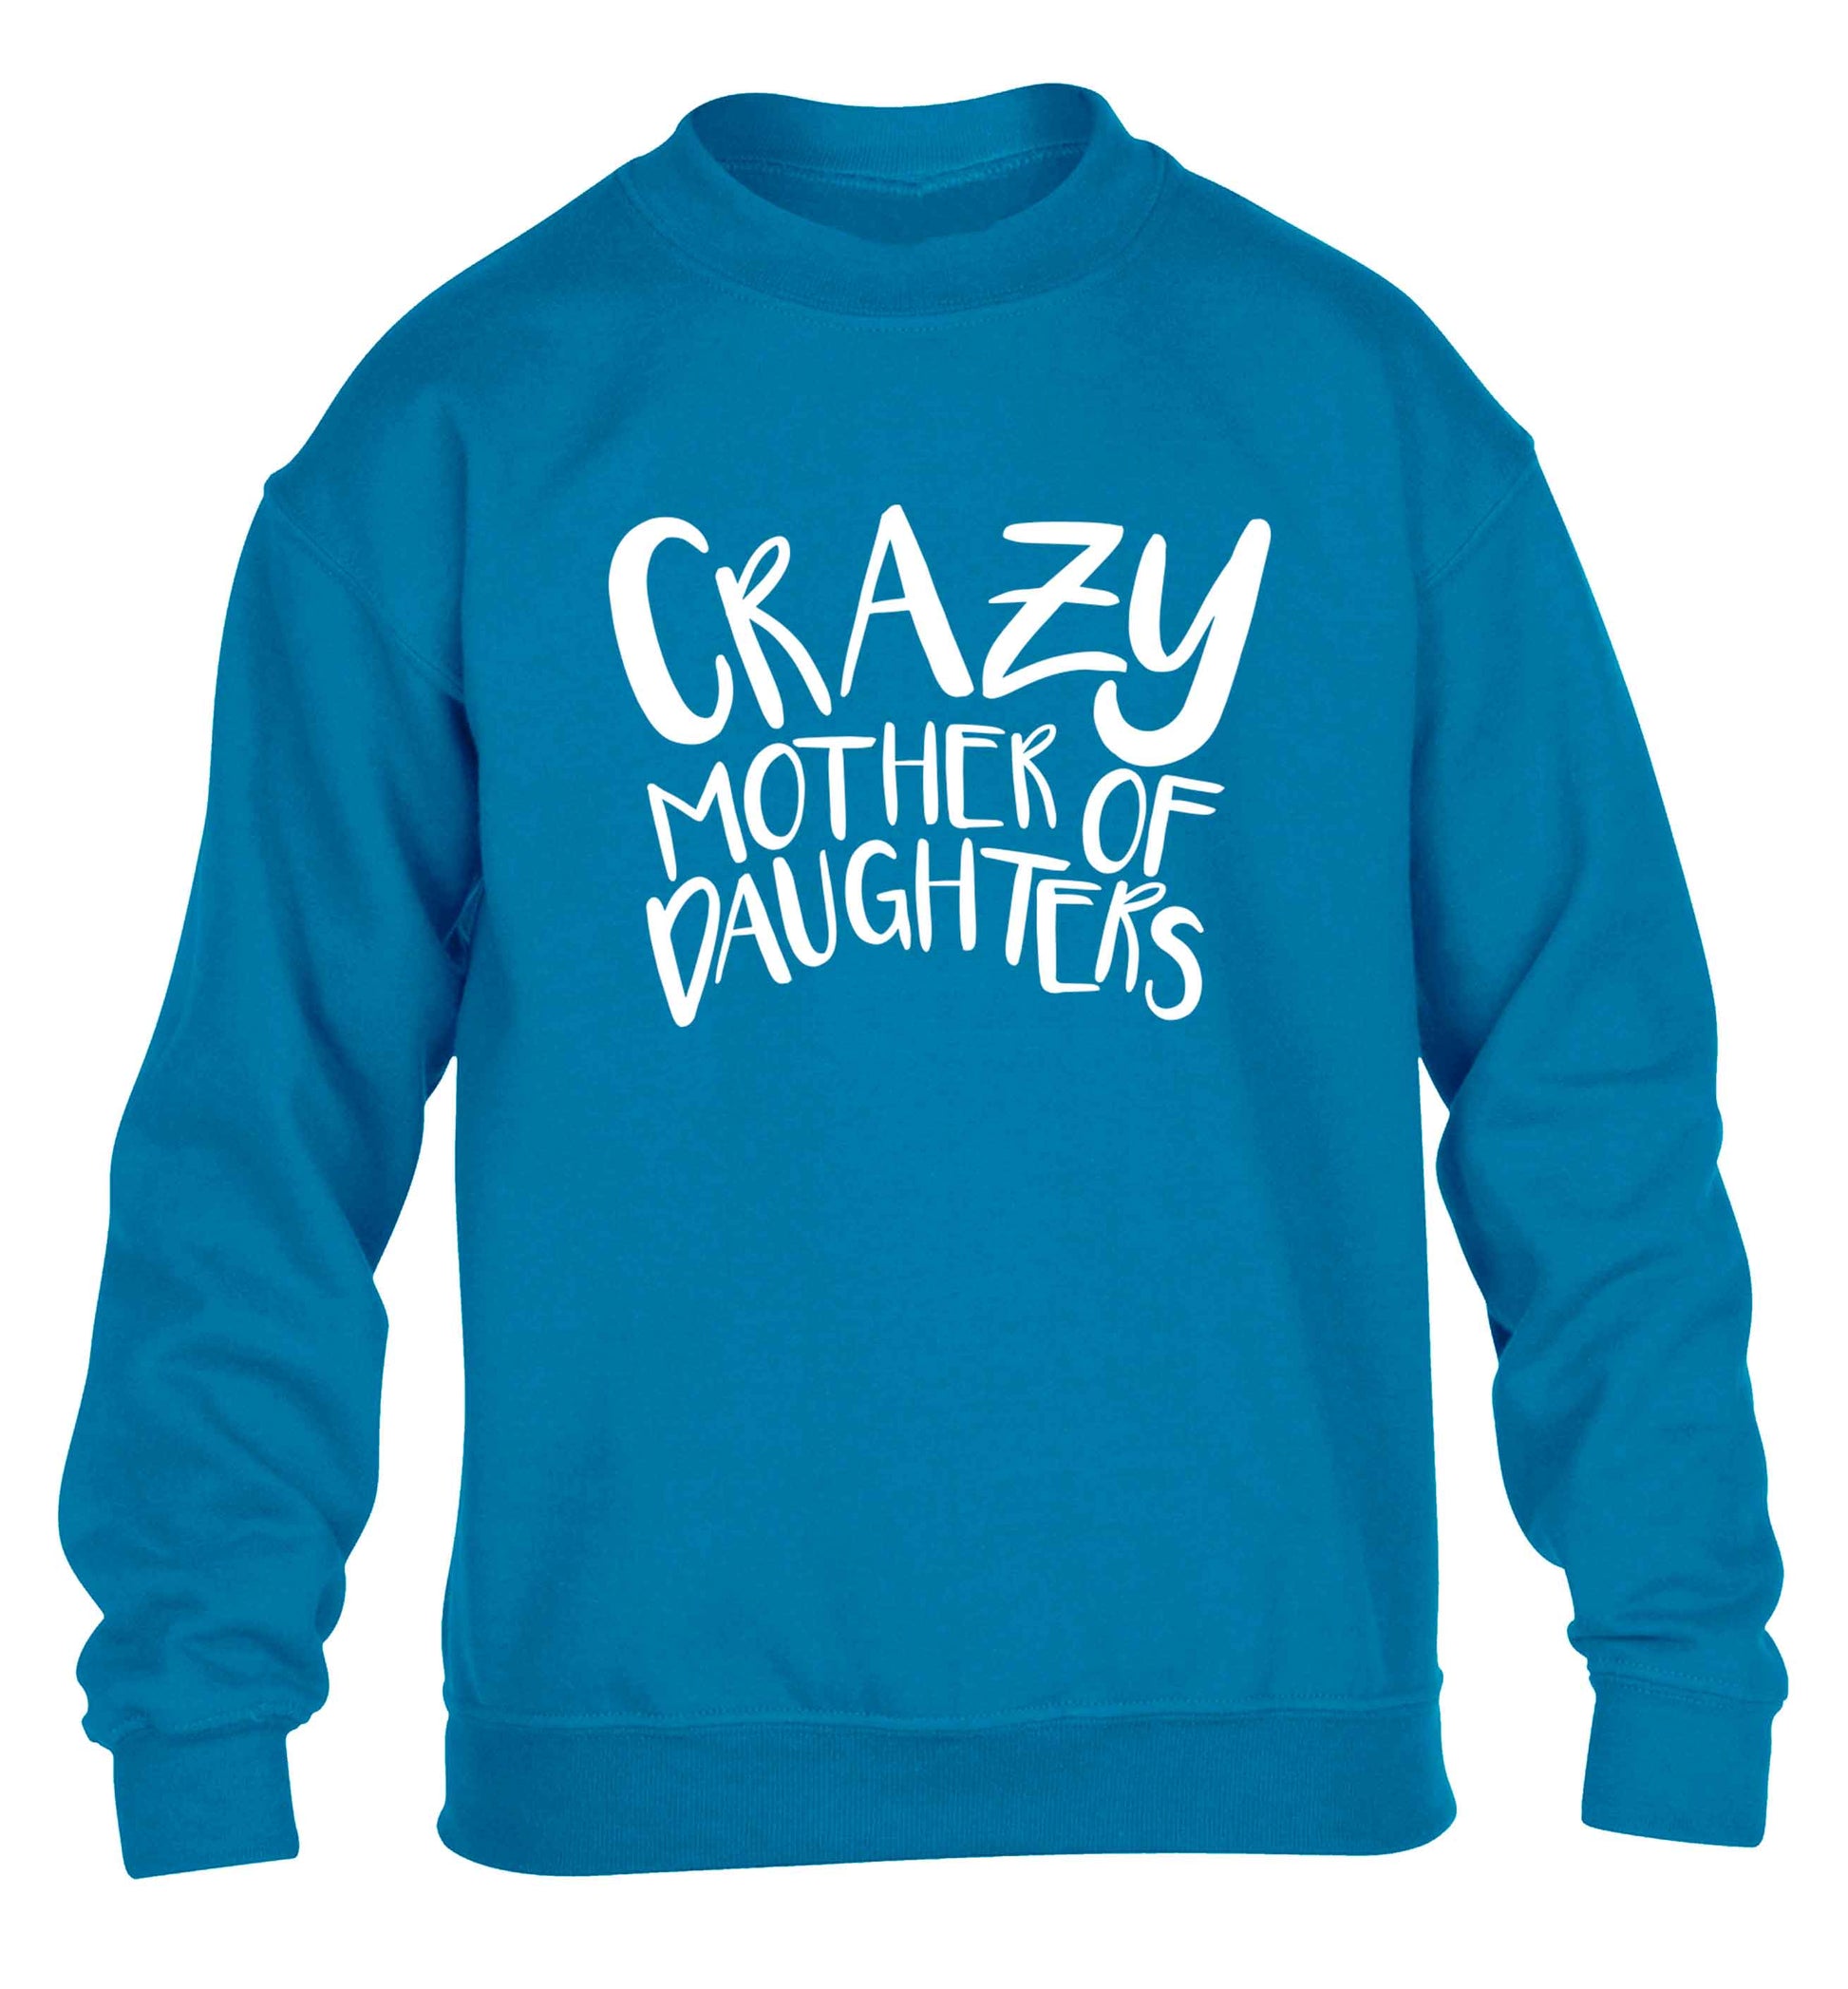 Crazy mother of daughters children's blue sweater 12-13 Years